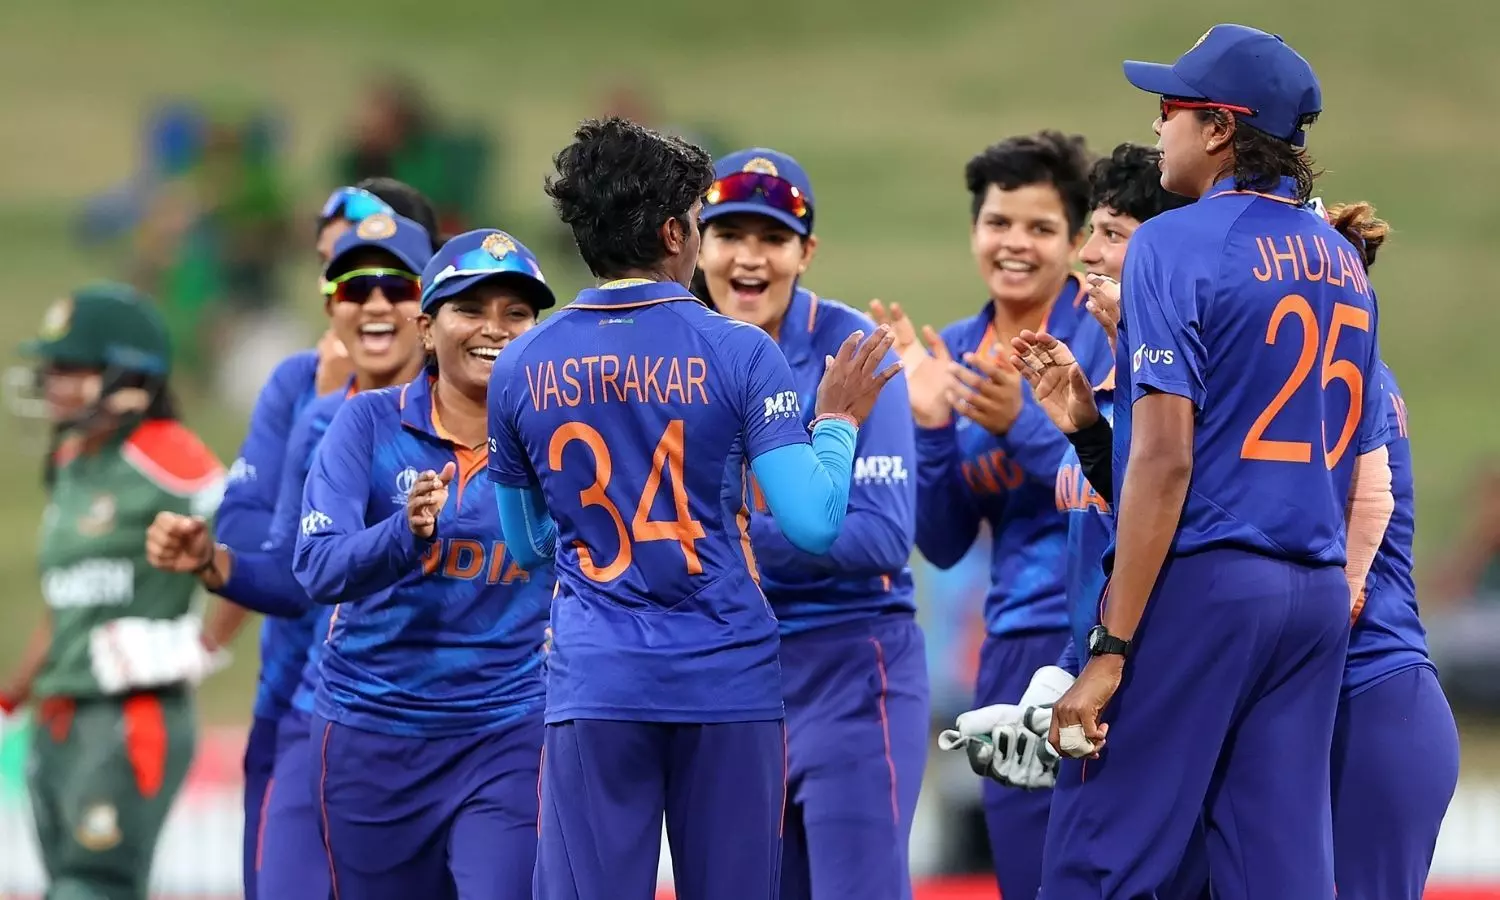 India out of the Womens World Cup after losing to South Africa in last-ball thriller Highlights